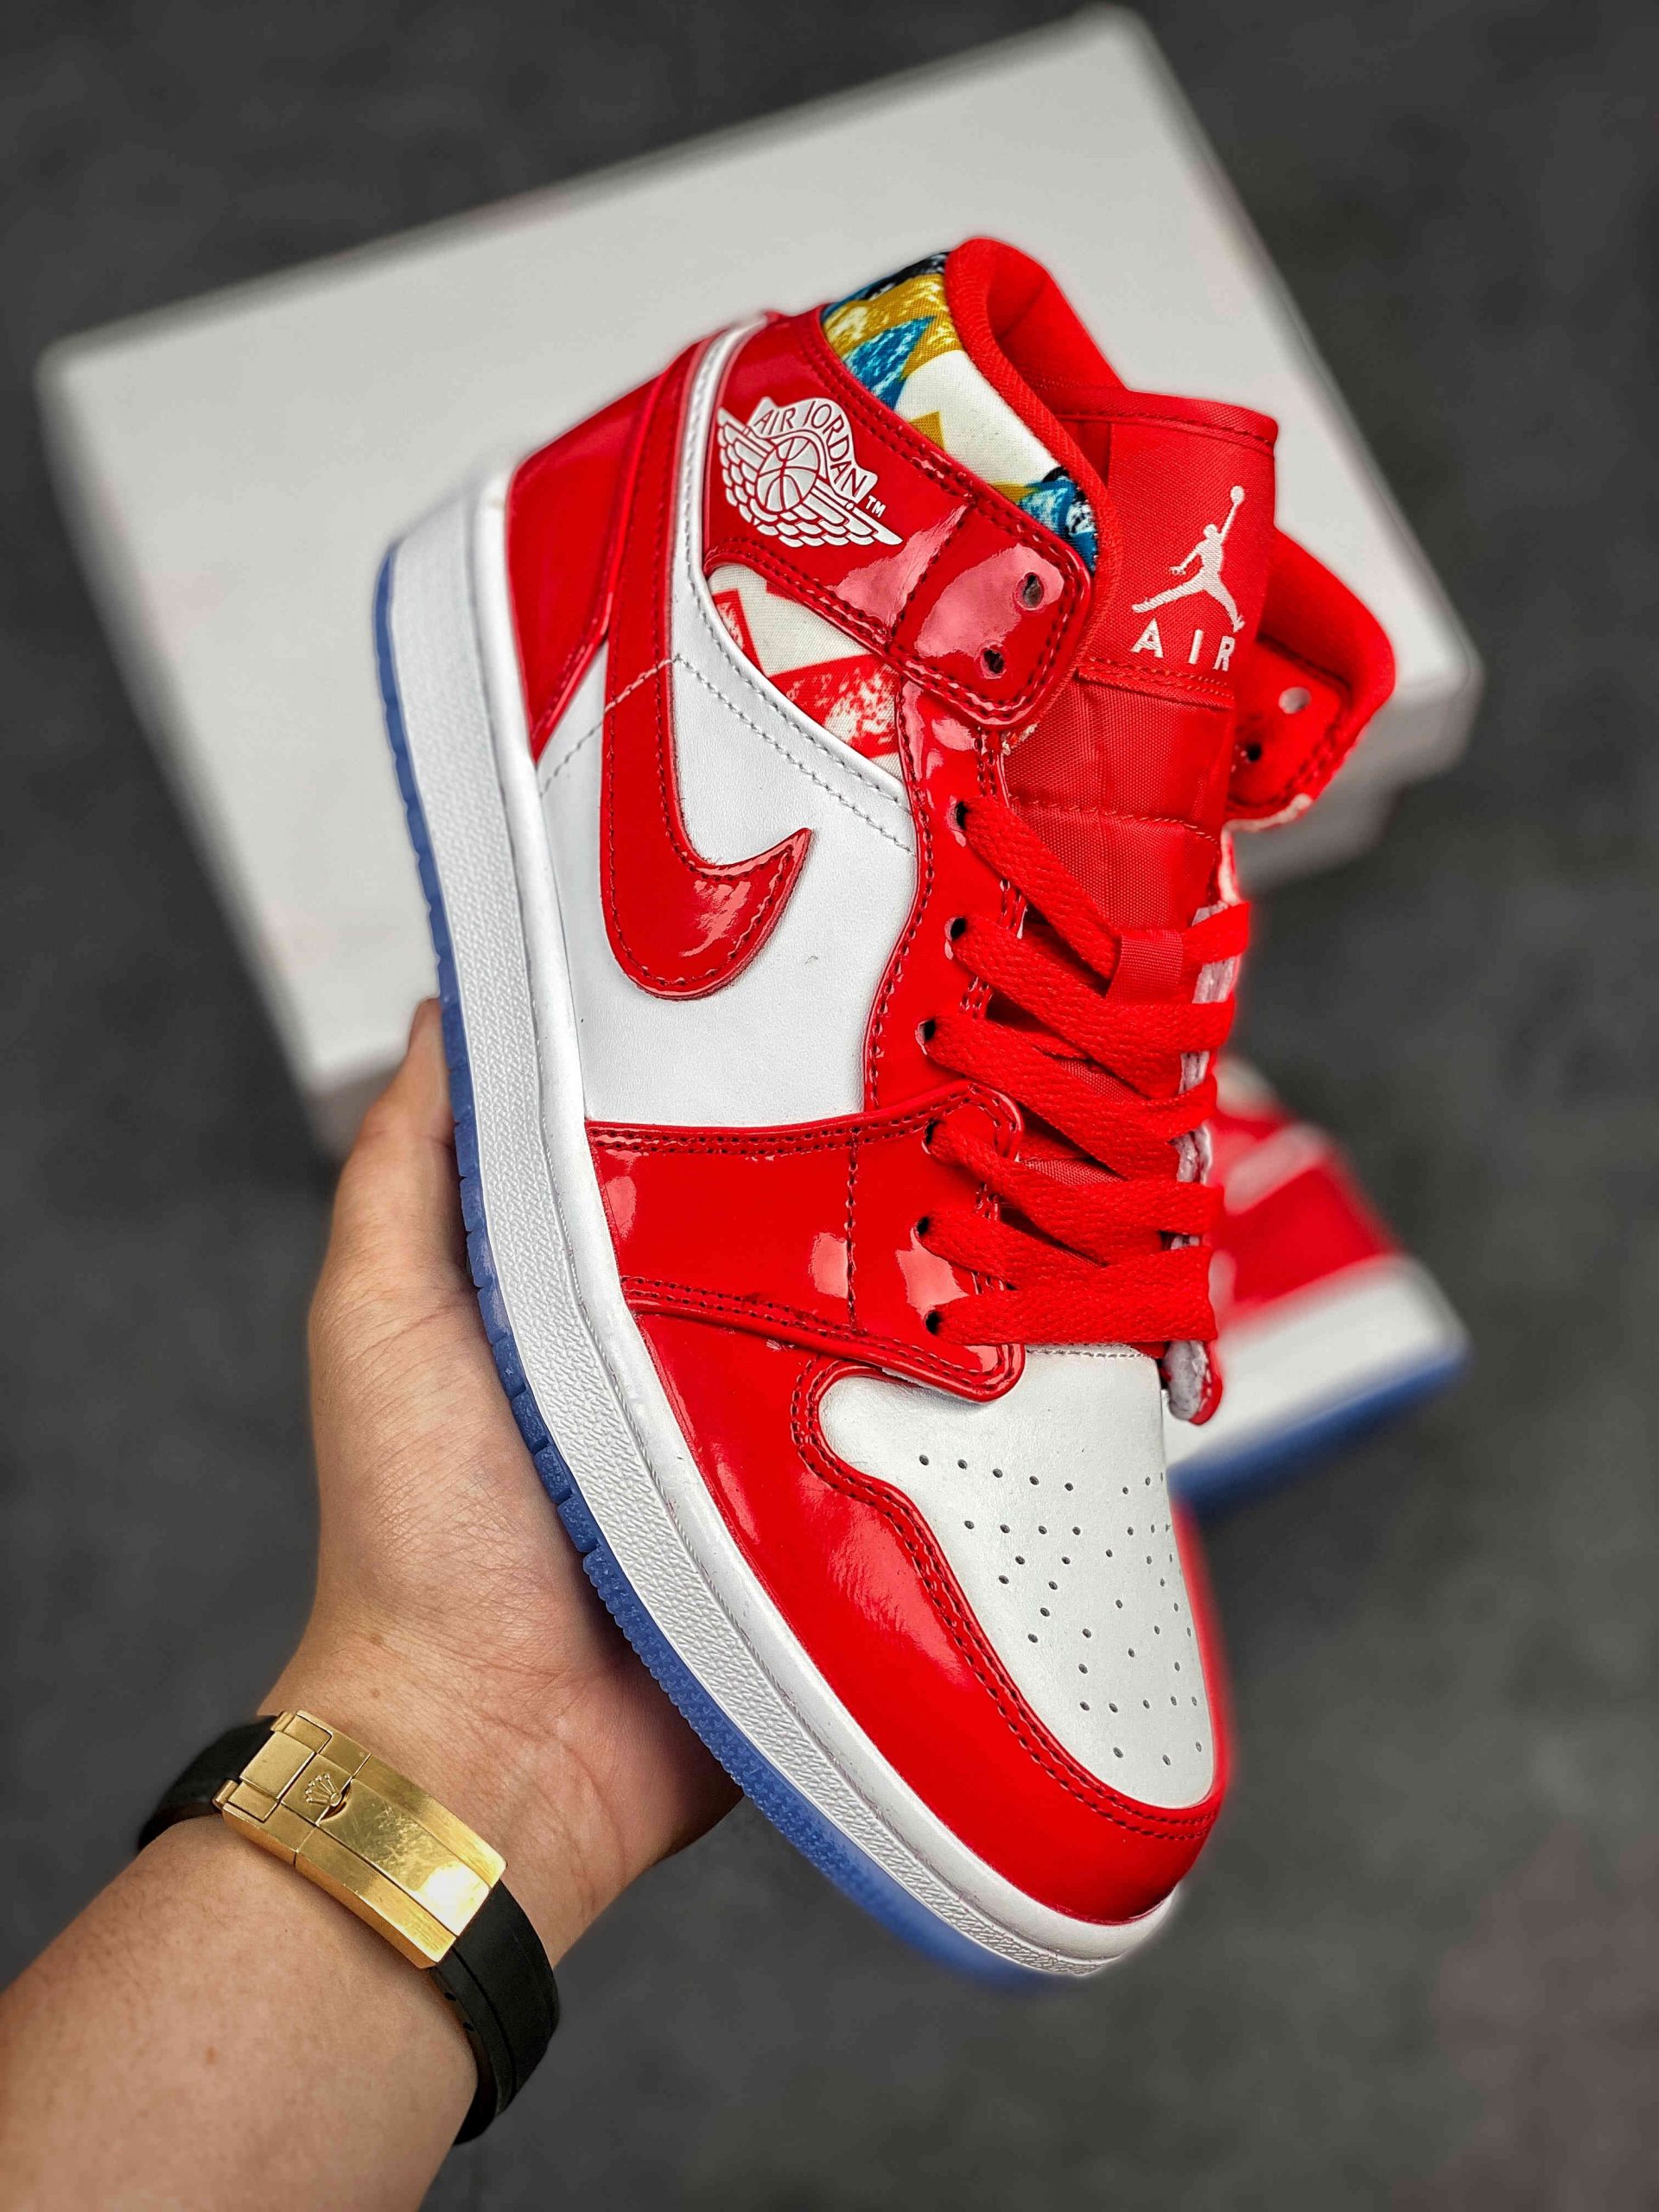 Air Jordan 1 Mid Red Patent DC7294600 For Sale Sneaker Hello